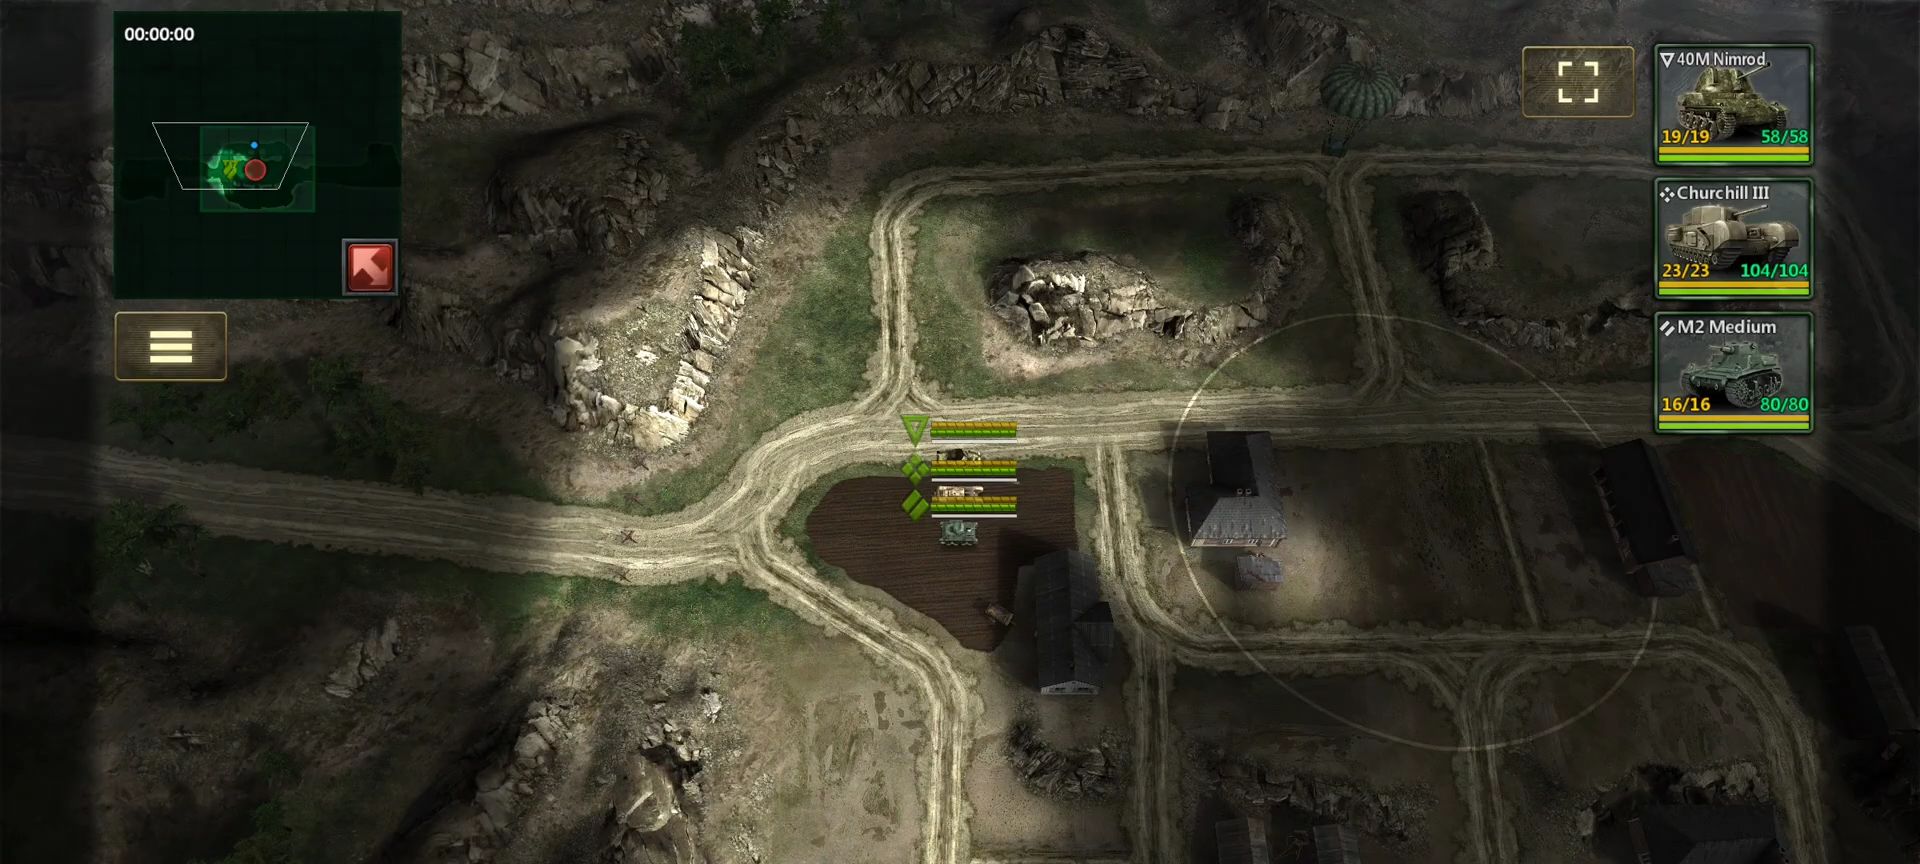 Baixar Tanks Charge: Online PvP Arena para Android grátis.